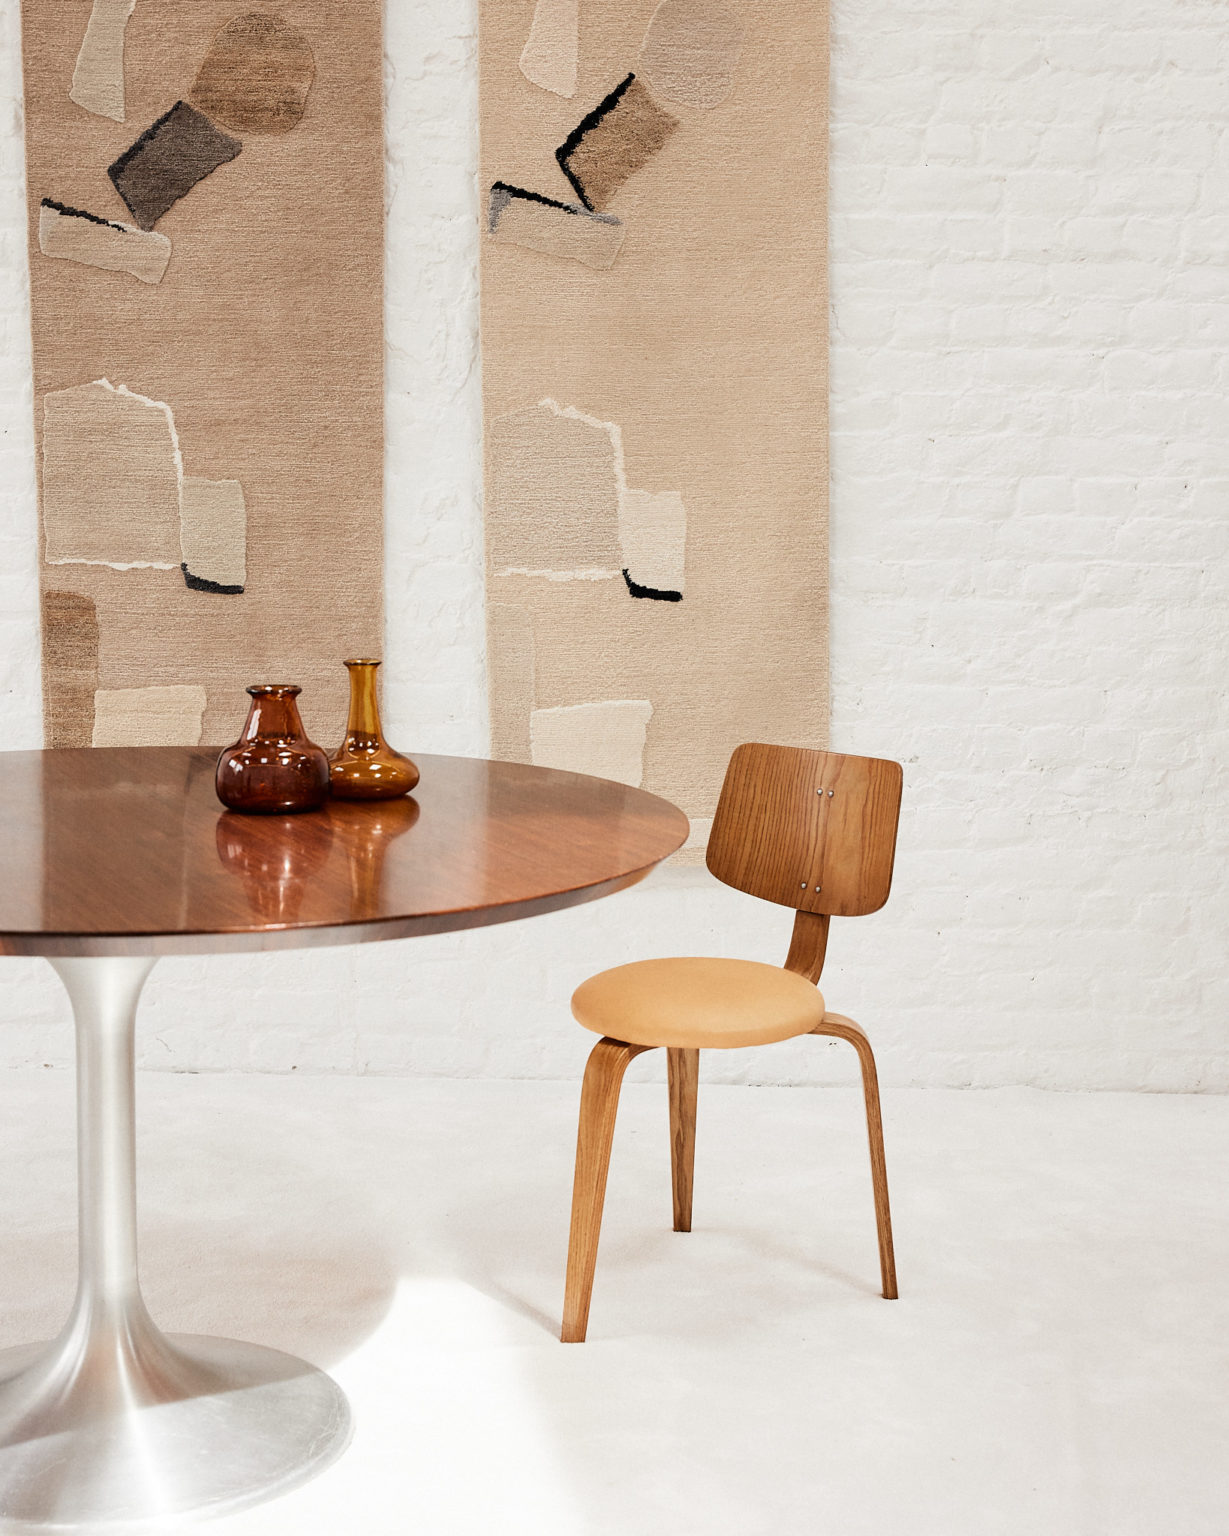 "Agarico" Round Table by Beppe vida